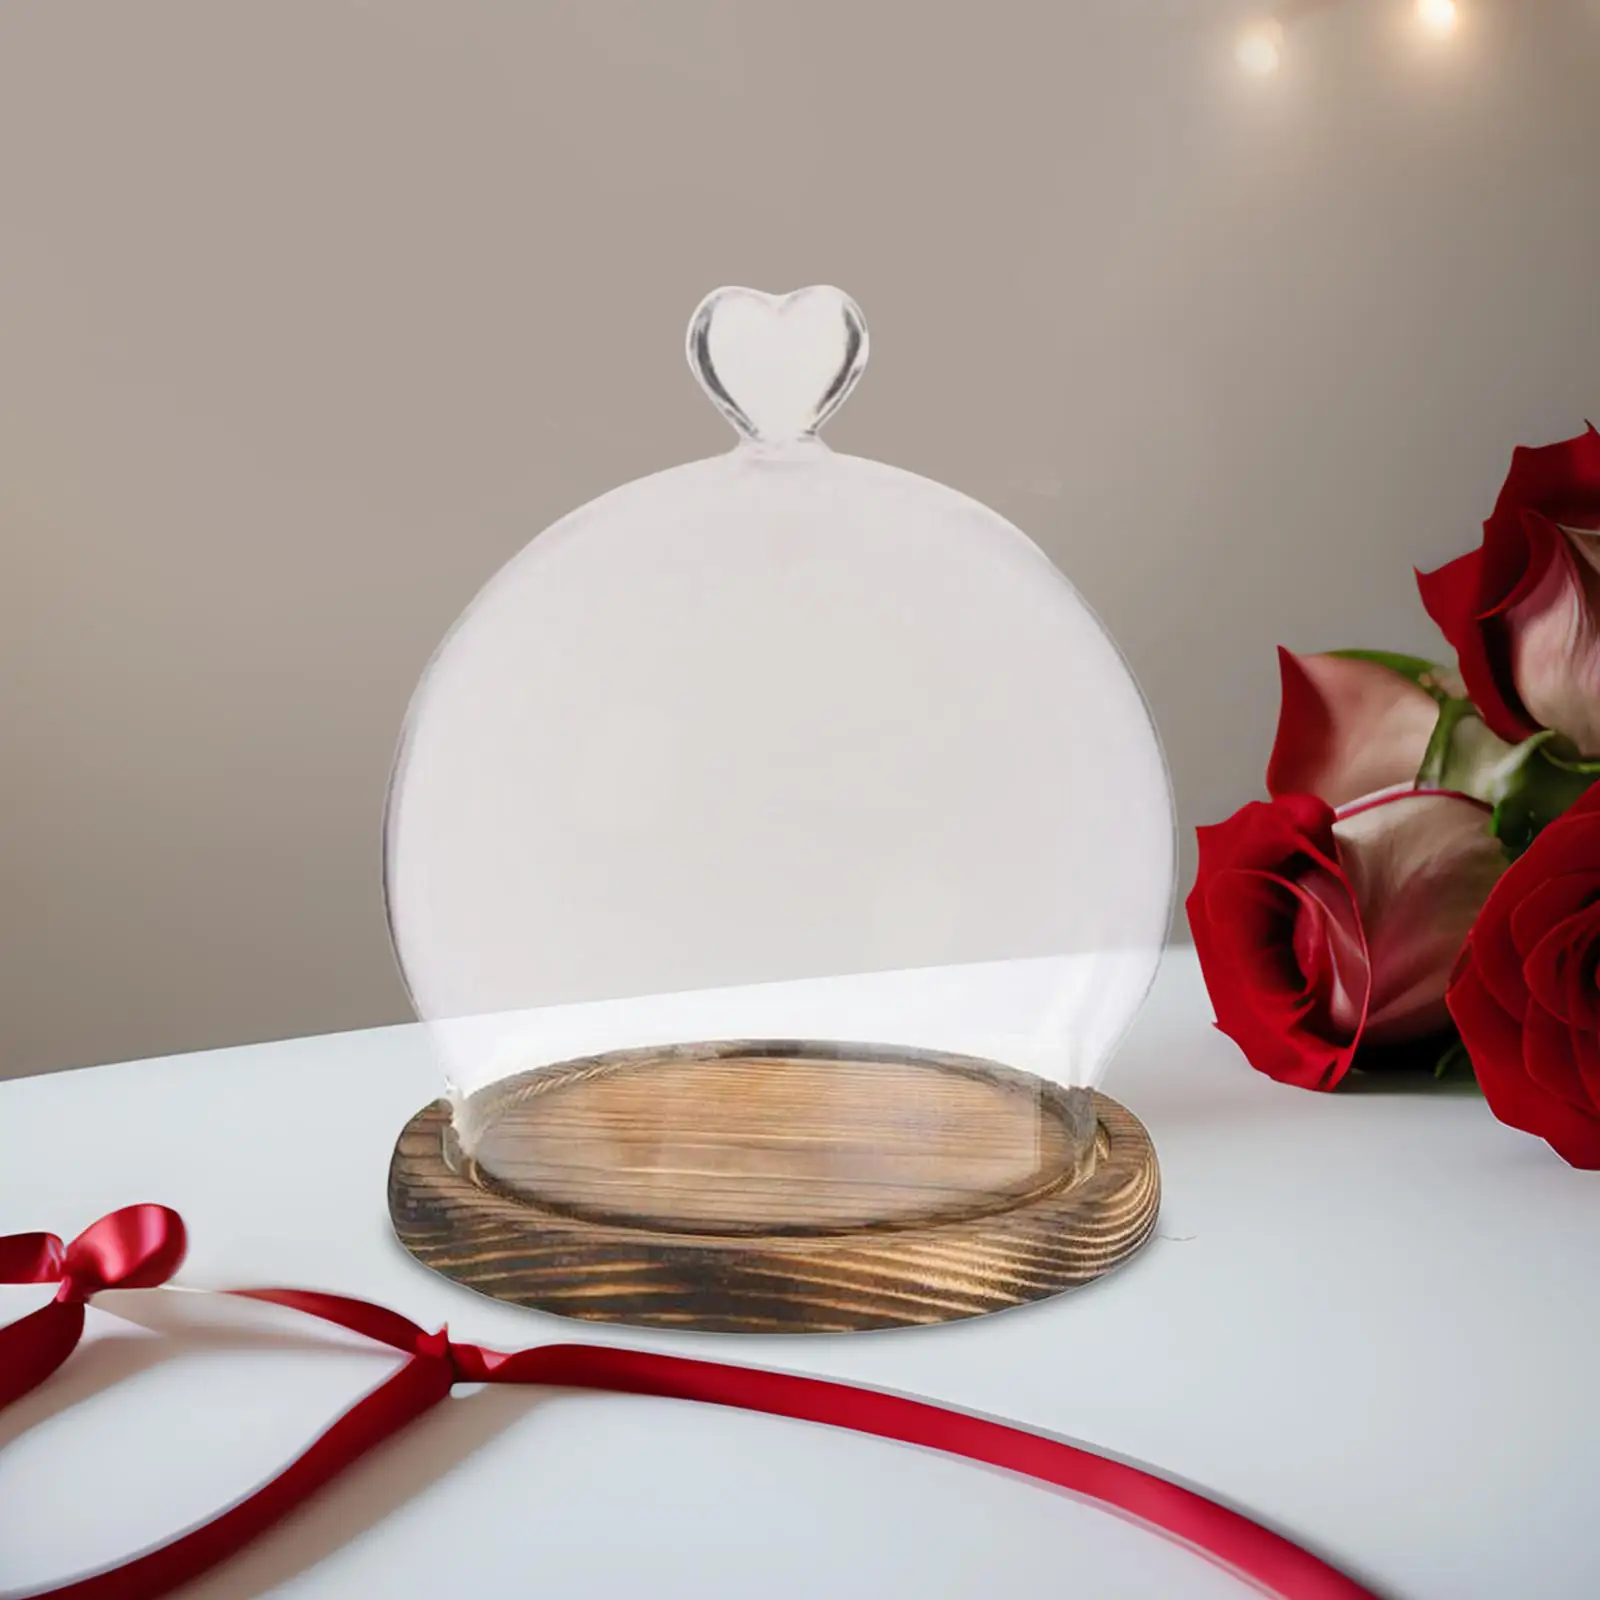 Display Dome with Wooden Base DIY Valentines Day Decor Collectibles Anniversary Gifts Home Decoration Jar Dustproof Display Case